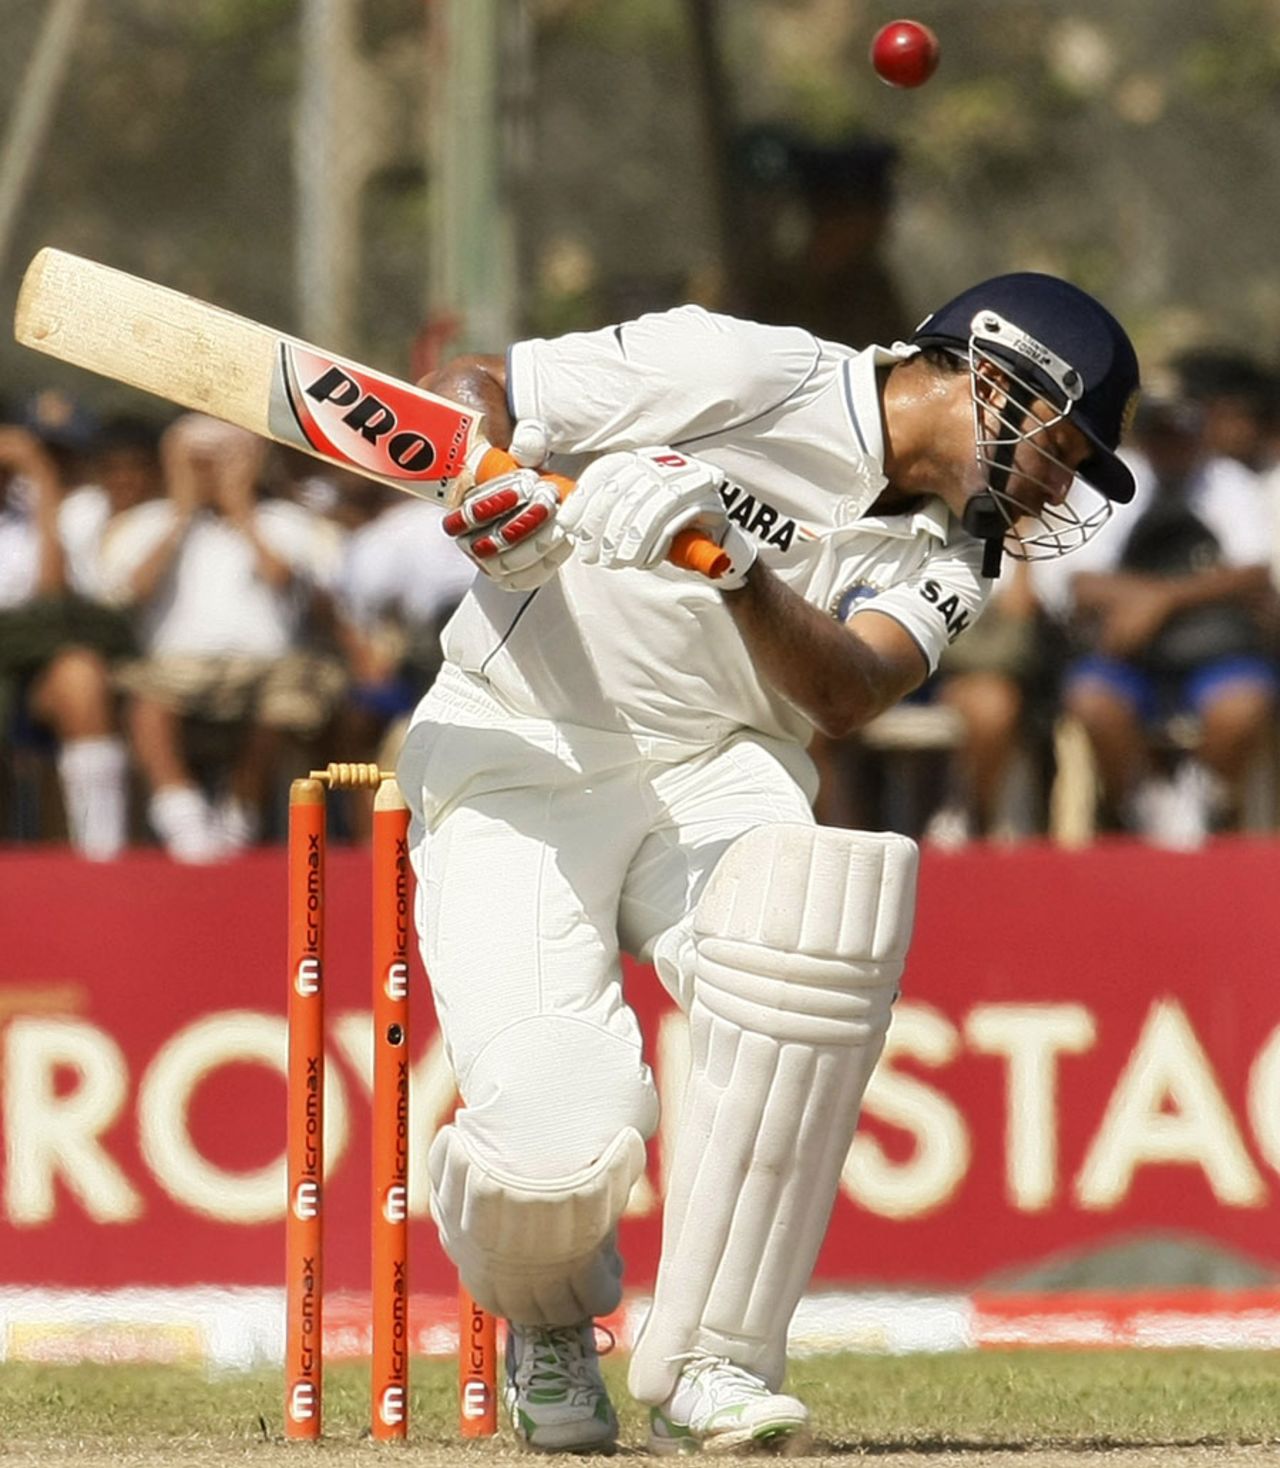 VVS Laxman was tested by a barrage of short balls before falling to one, Sri Lanka v India, 1st Test, Galle, 4th day, July 21, 2010